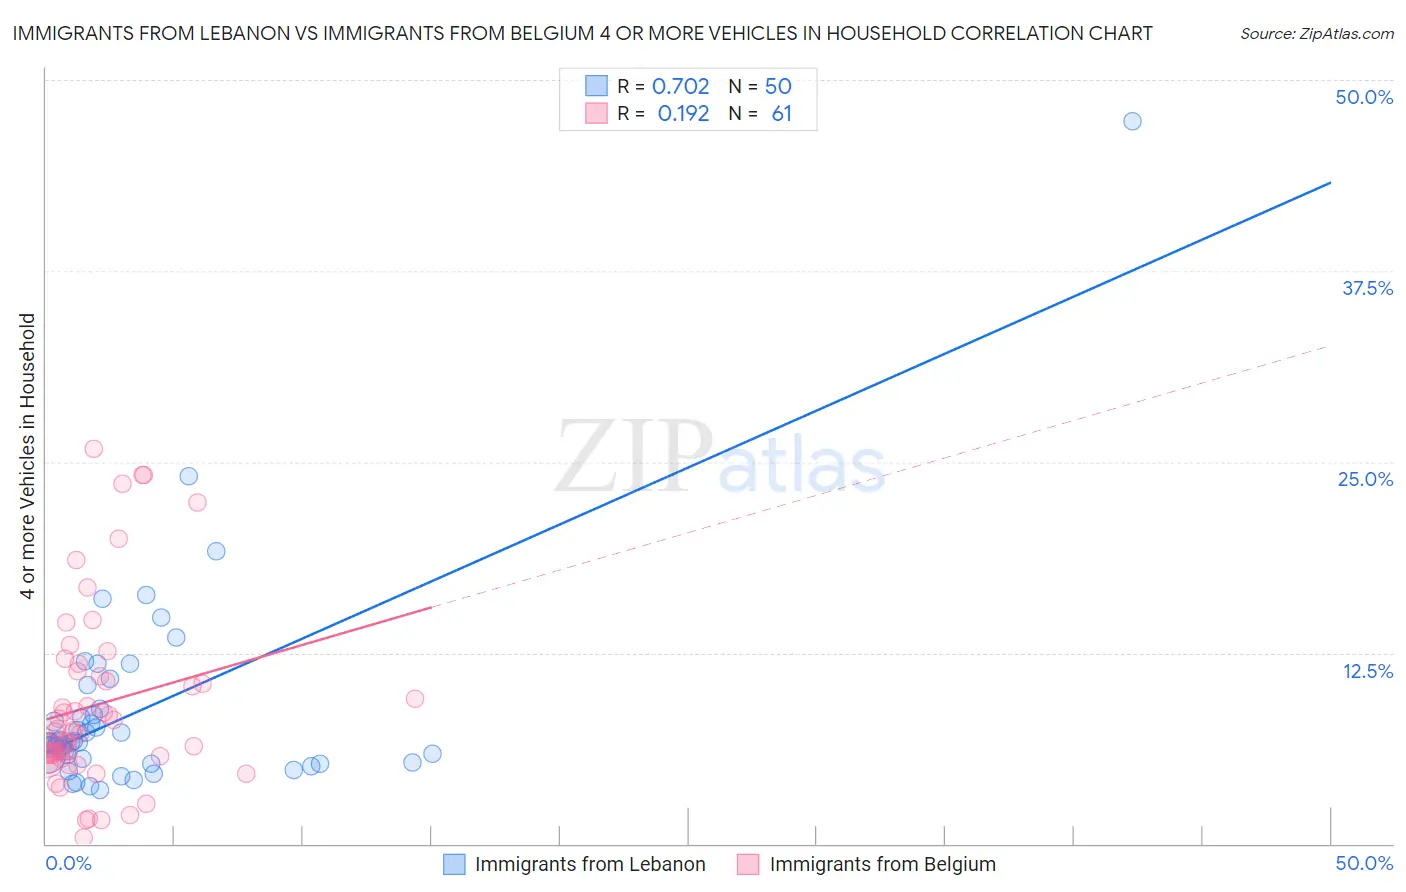 Immigrants from Lebanon vs Immigrants from Belgium 4 or more Vehicles in Household